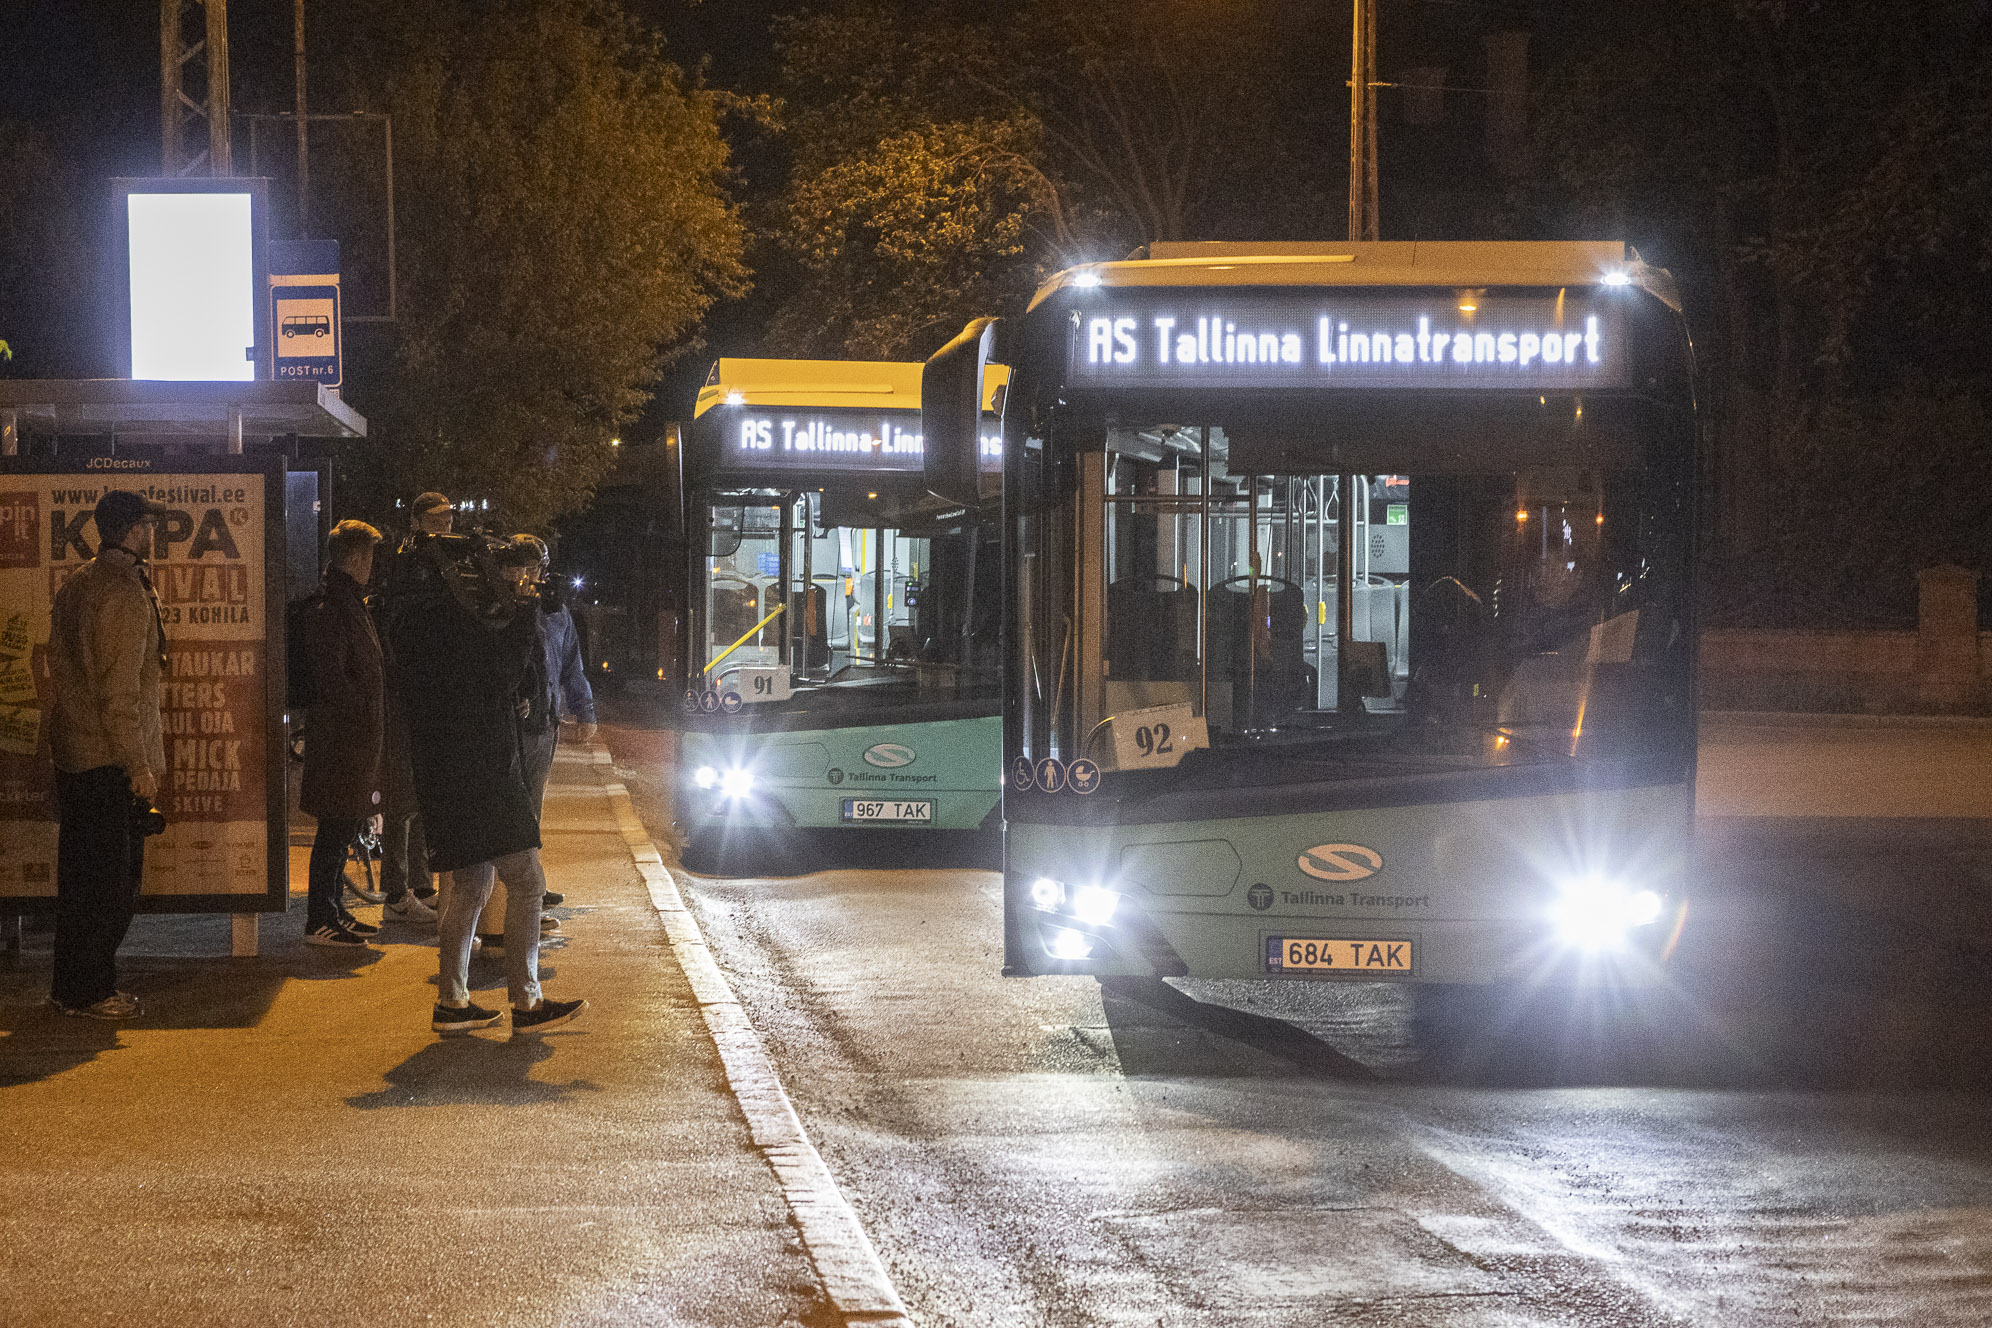 Night bus pilot project launched by Tallinn